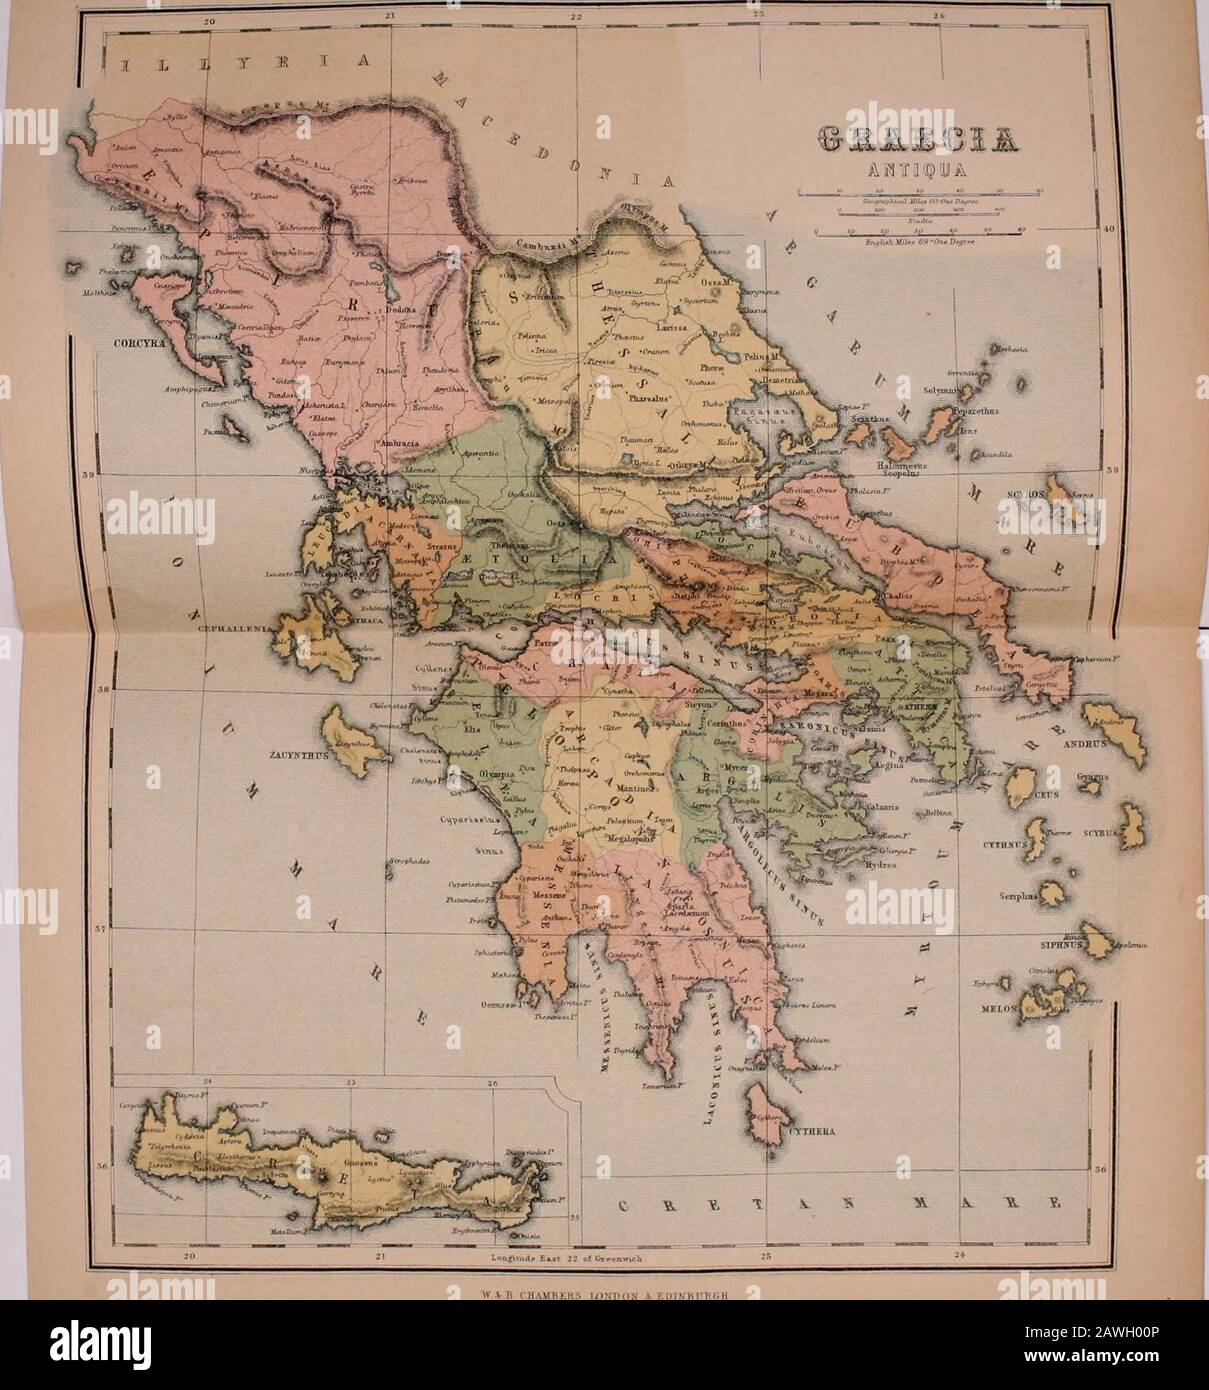 Chambers's encyclopædia; a dictionary of universal knowledge . s of Attica, is extended through Megarisinto the Morea or Peloponnesus by a lower ridge,which, passing across the isthmus of Corinth,stretches even to the west coast. Of this range, thetwo most conspicuous points are Mounts Cylleneand Erymanthus, from which two chains run southon the east and west of Arcadia respectively, andunder the names Taygetus (Pentedactylon) andParnon (Malevo), terminate in the promontoriesof Taenarus and Malea. Besides these, there aremany shorter chains and individual peaks, which itwould be tedious and ou Stock Photo